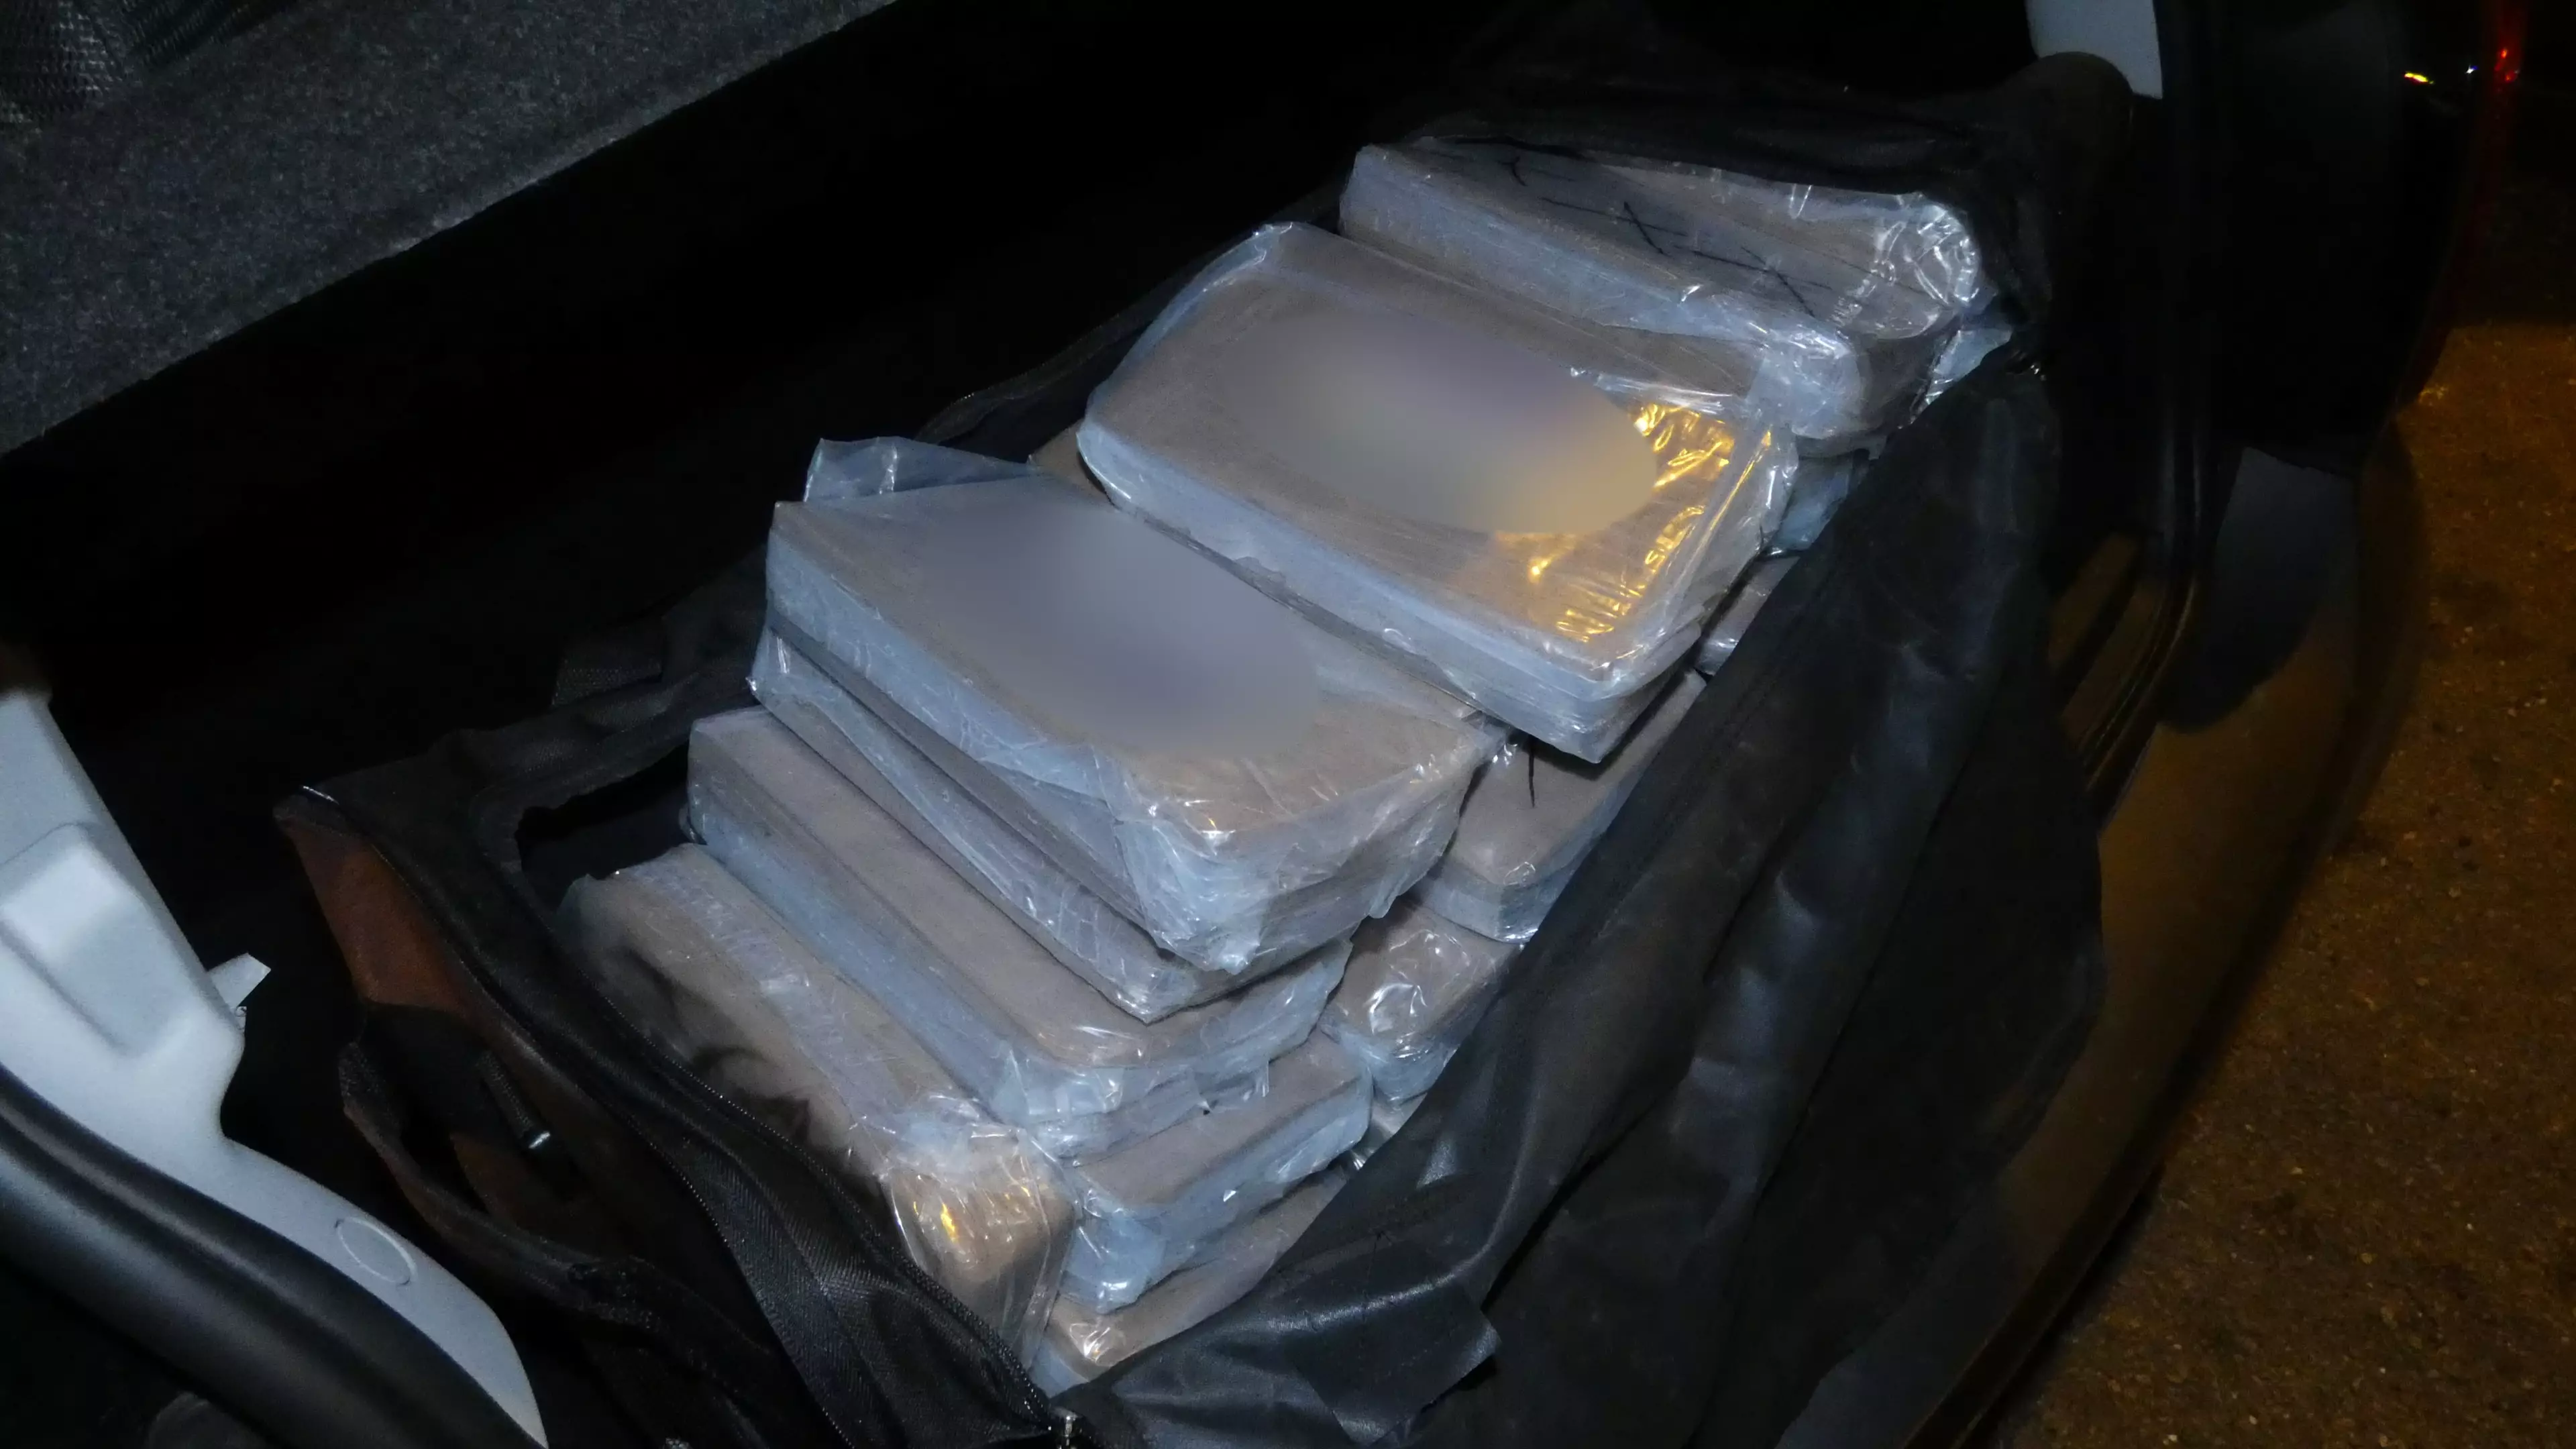 Man Found With £3,000,000 Worth Of Cocaine In Back Of His Smart Car